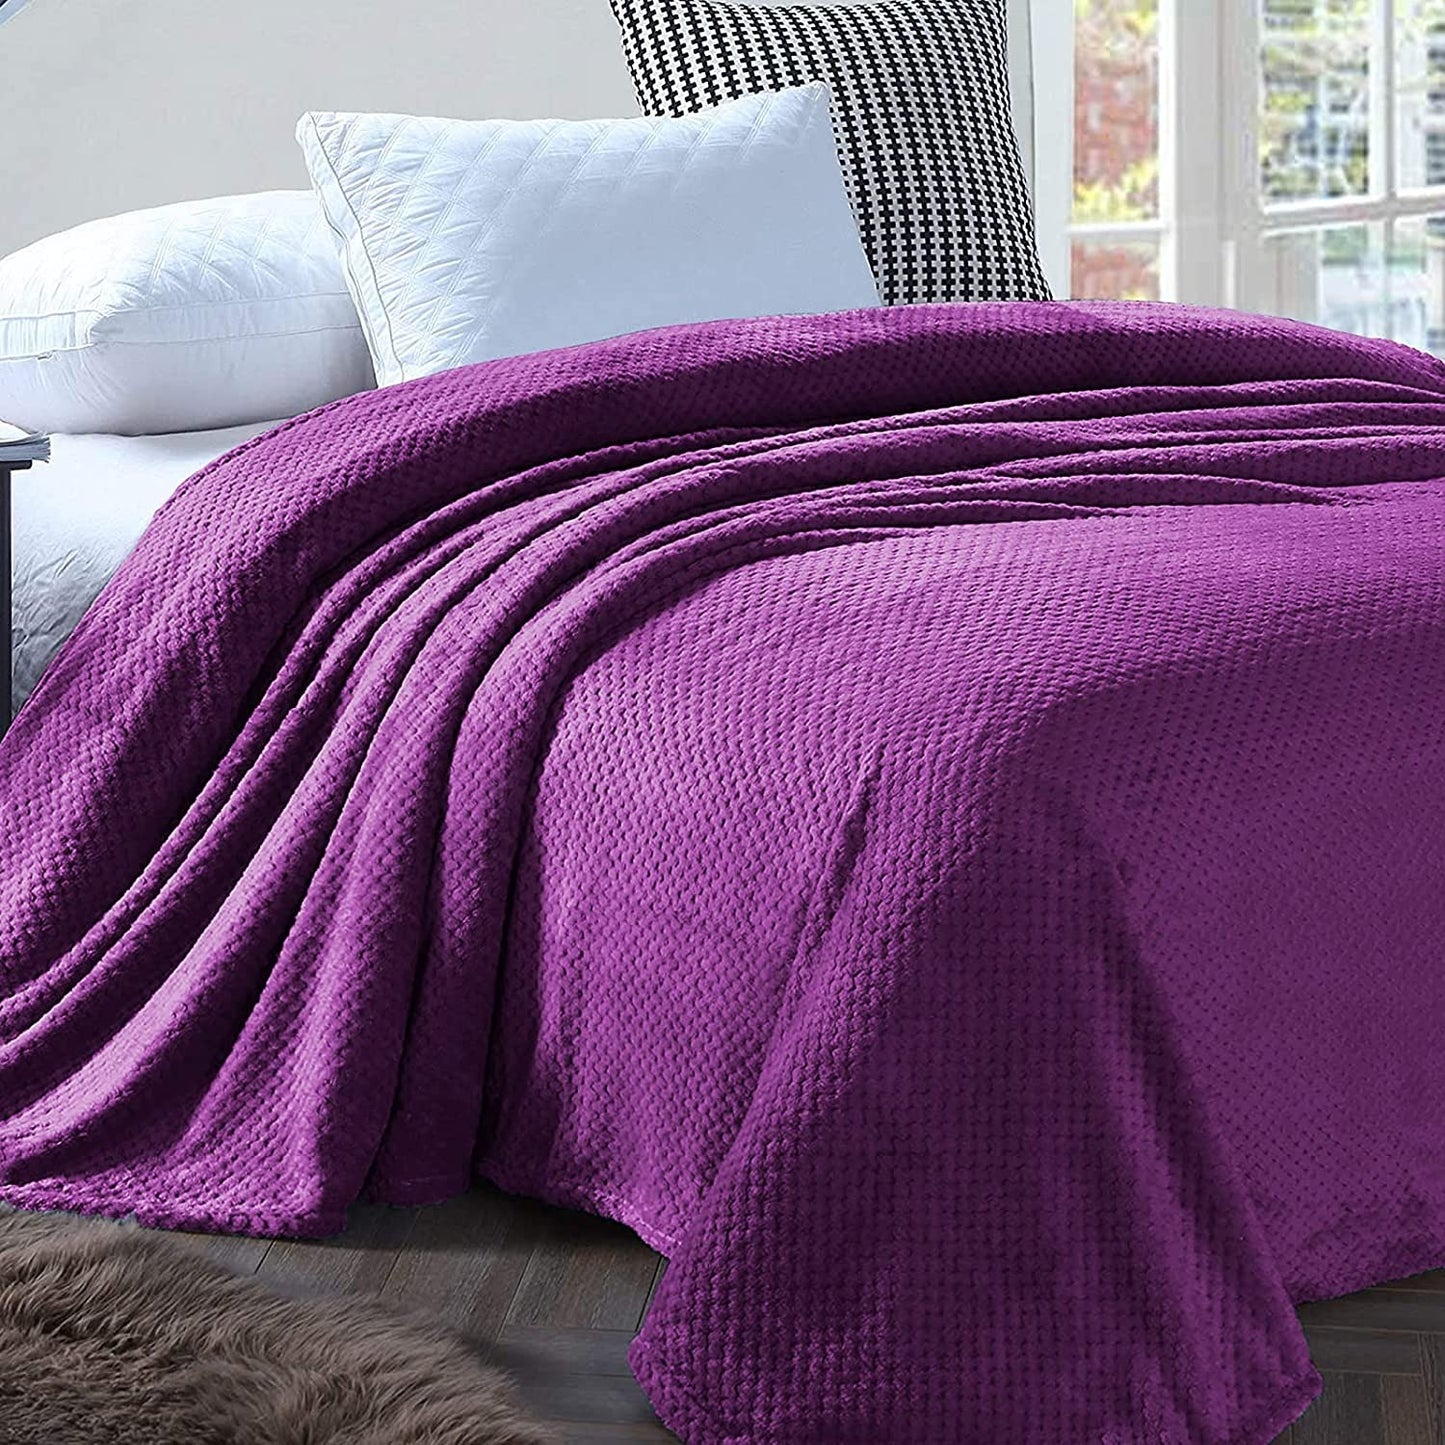 Exclusivo Mezcla Waffle Textured Soft Fleece Blanket, Twin Size Bed Blanket, Cozy Warm and Lightweight (Purple, 90x66 inches)